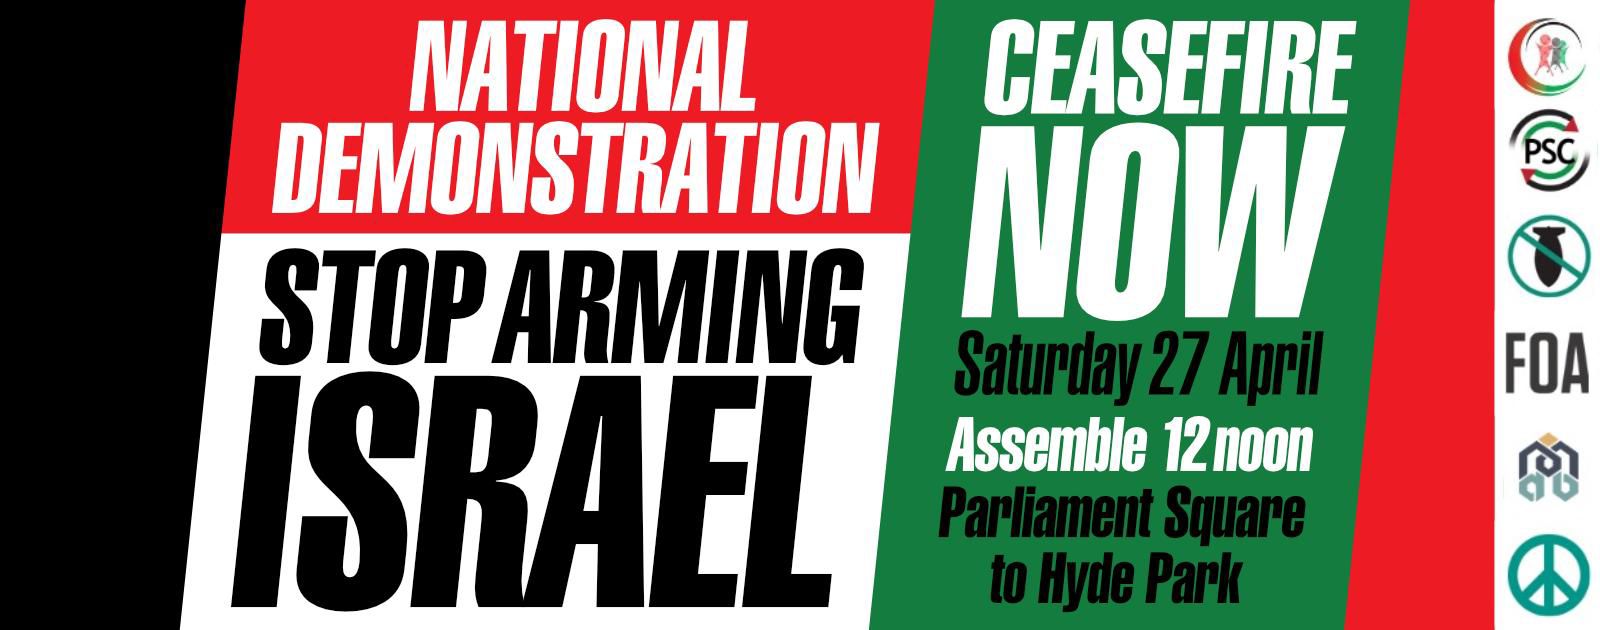 National Demonstration Stop Arming Israel Ceasefire Now Saturday 27 April Assemble 12 noon Parliament Square to Hyde Park Logos of CND Muslim Association of Britain Stop the War Coalition PSC and the Palestinian Forum in Britain